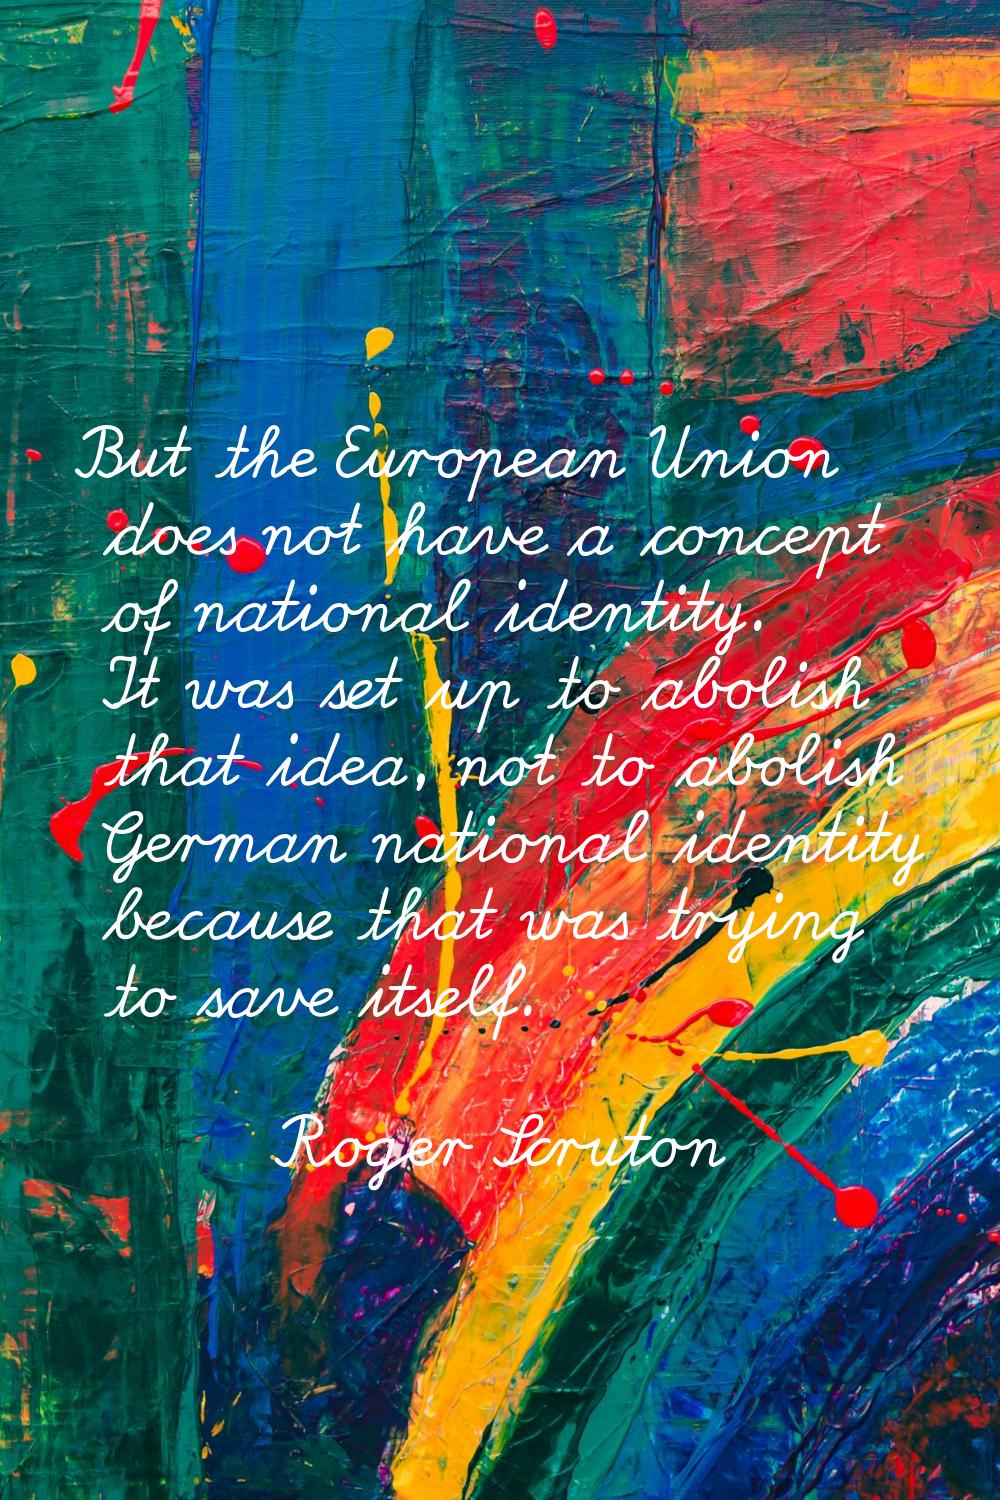 But the European Union does not have a concept of national identity. It was set up to abolish that 